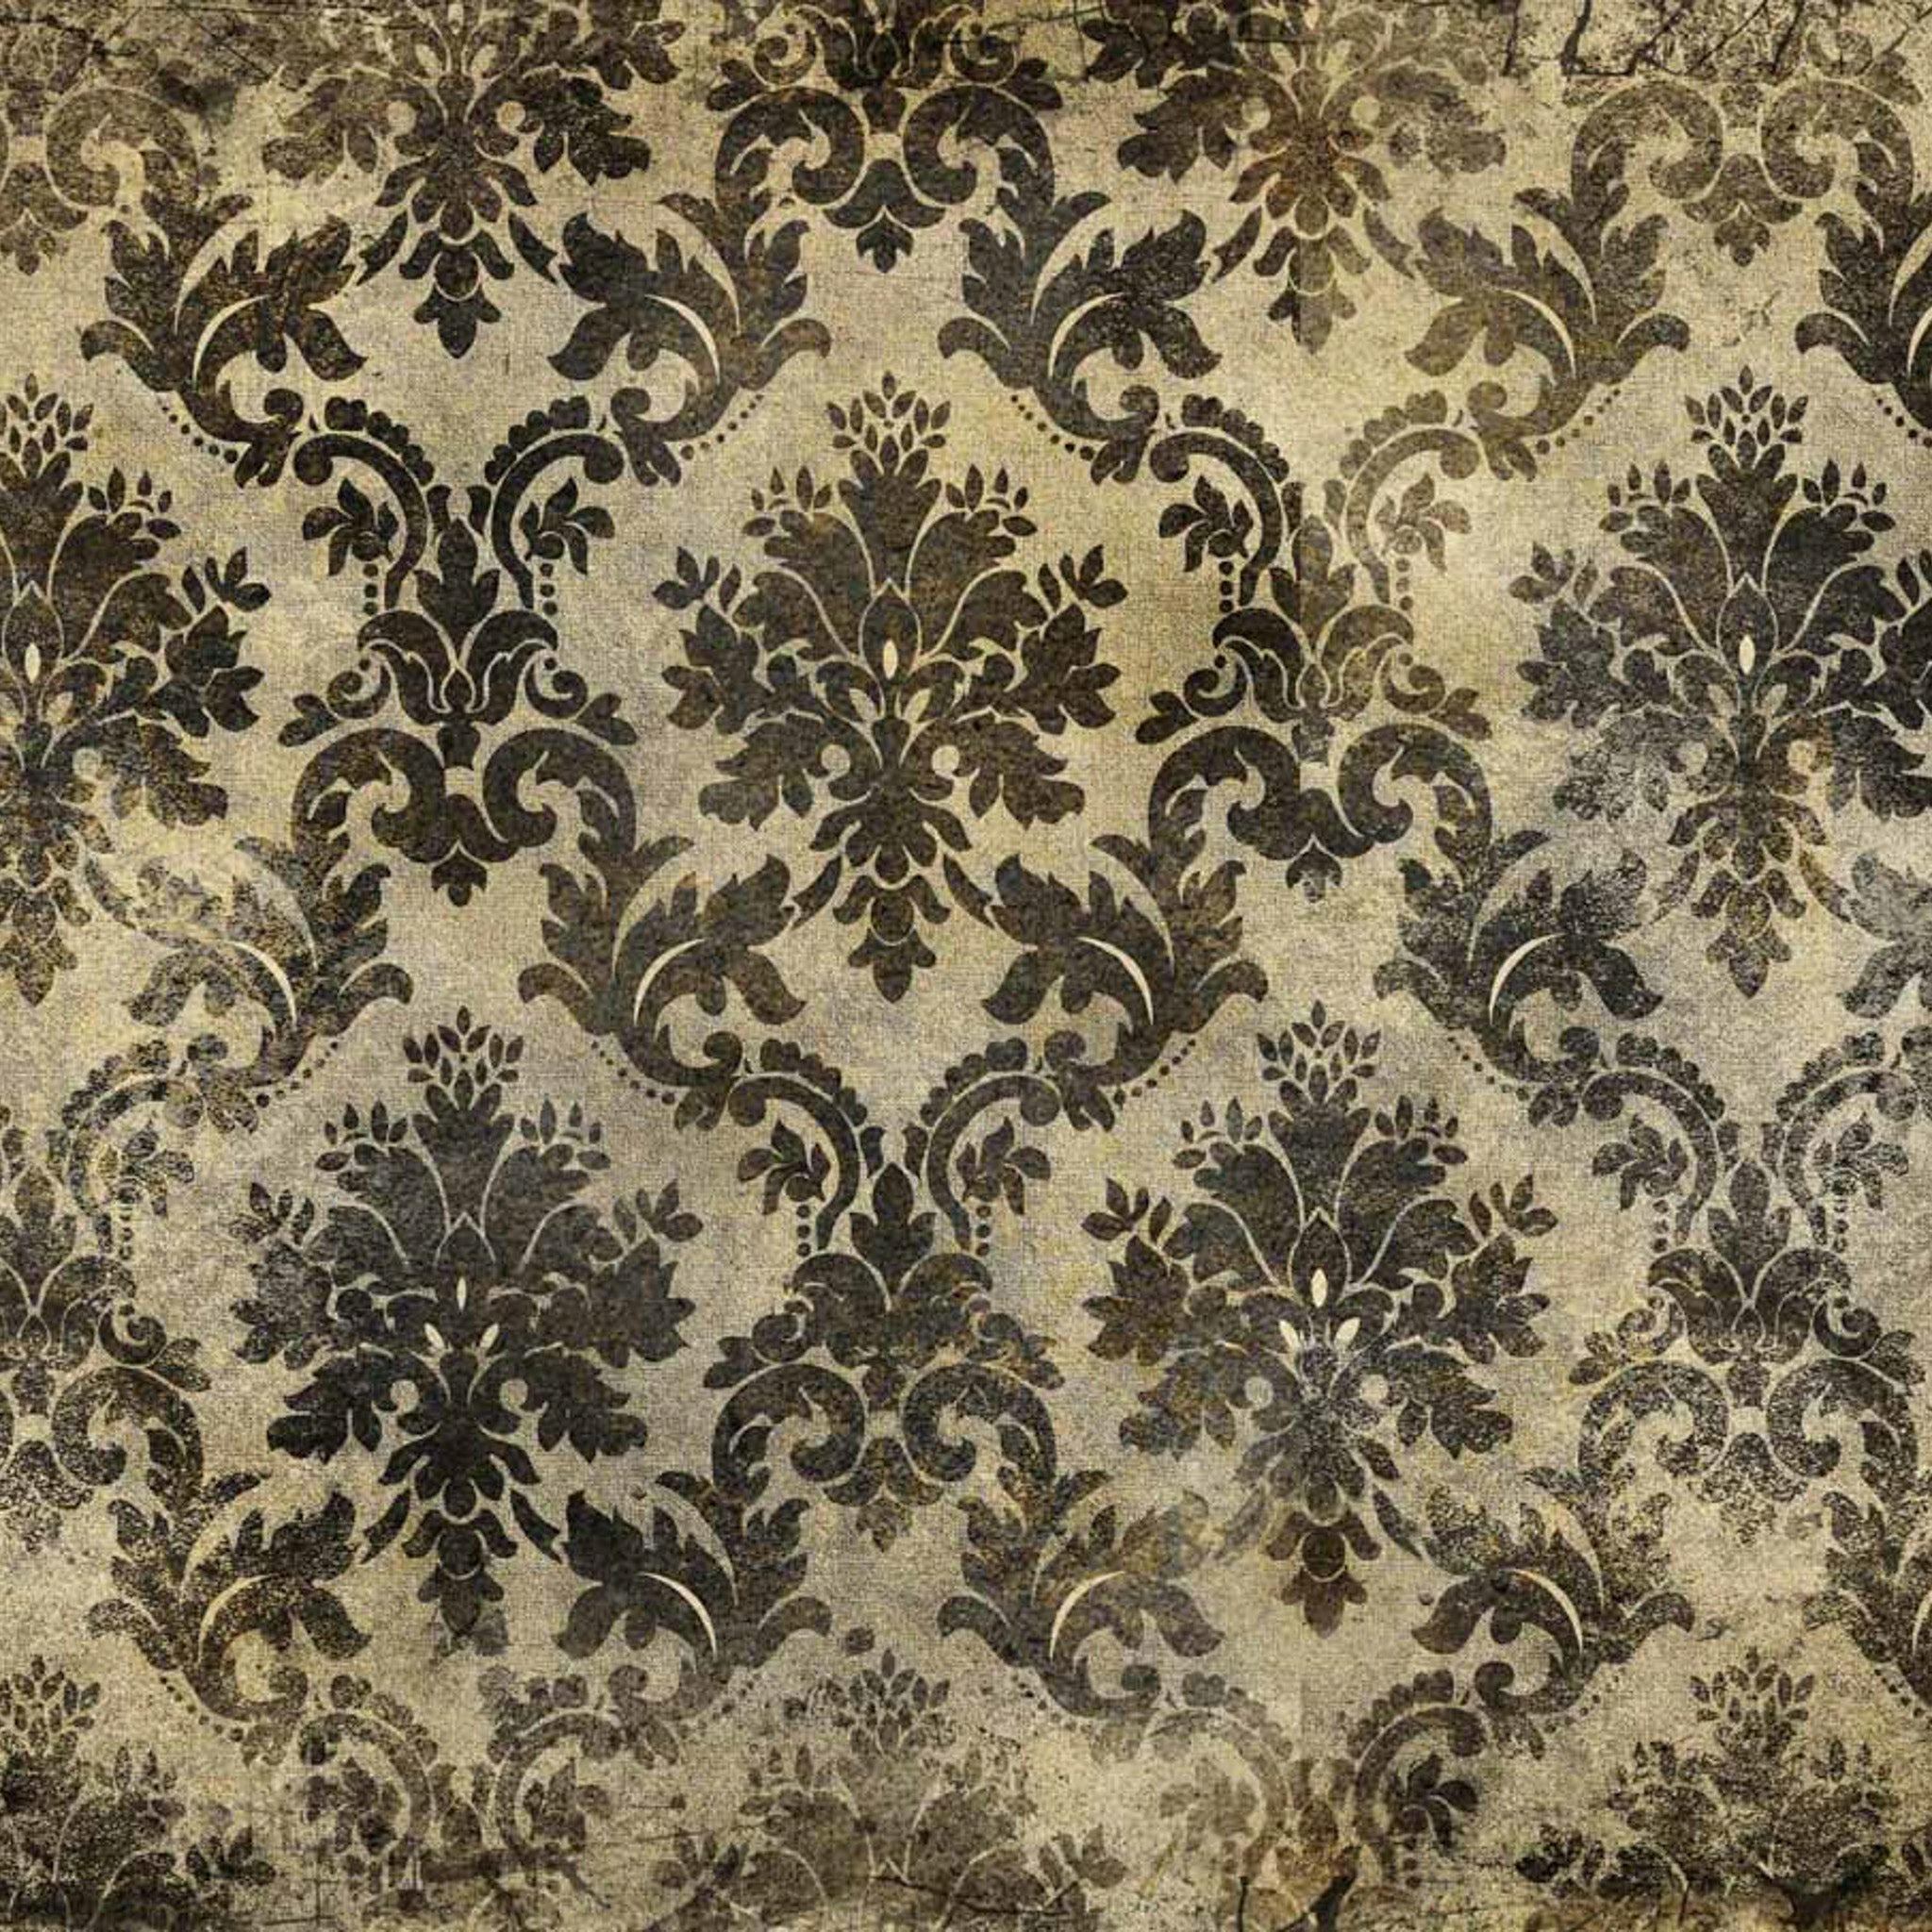 Vintage style Weathered Damask A2 Decoupage Rice Paper close up.